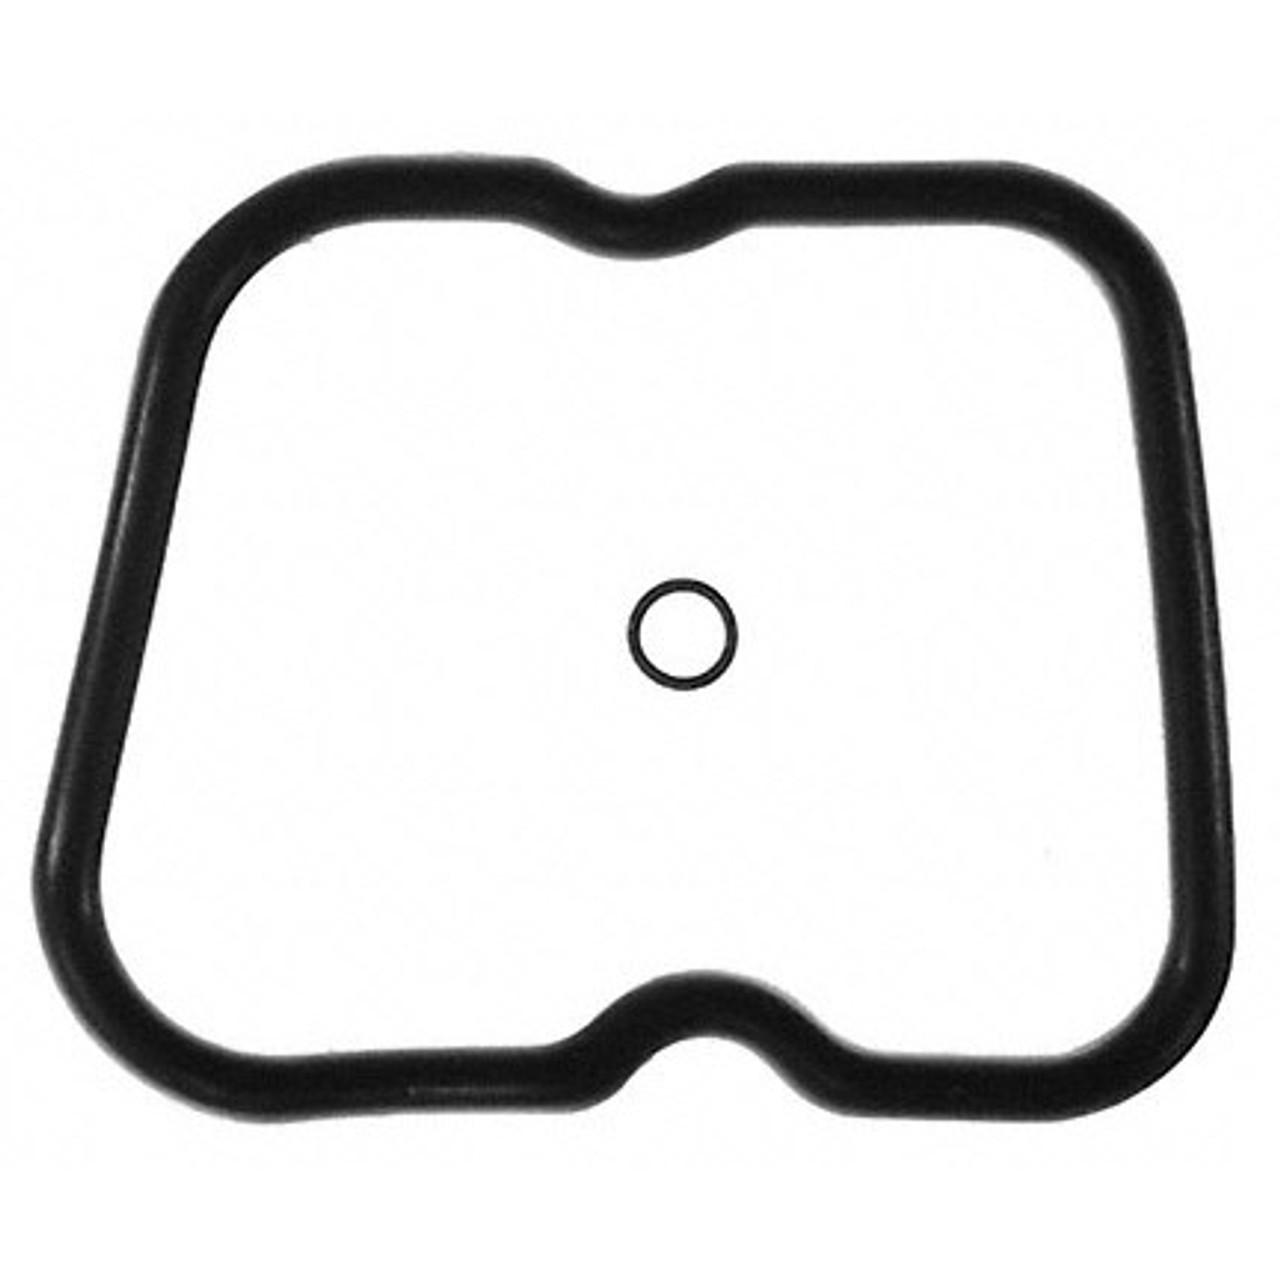 Mahle Valve Cover Gasket 1989 to 1998 5.9L Cummins (MCIVS50215S)-Main View